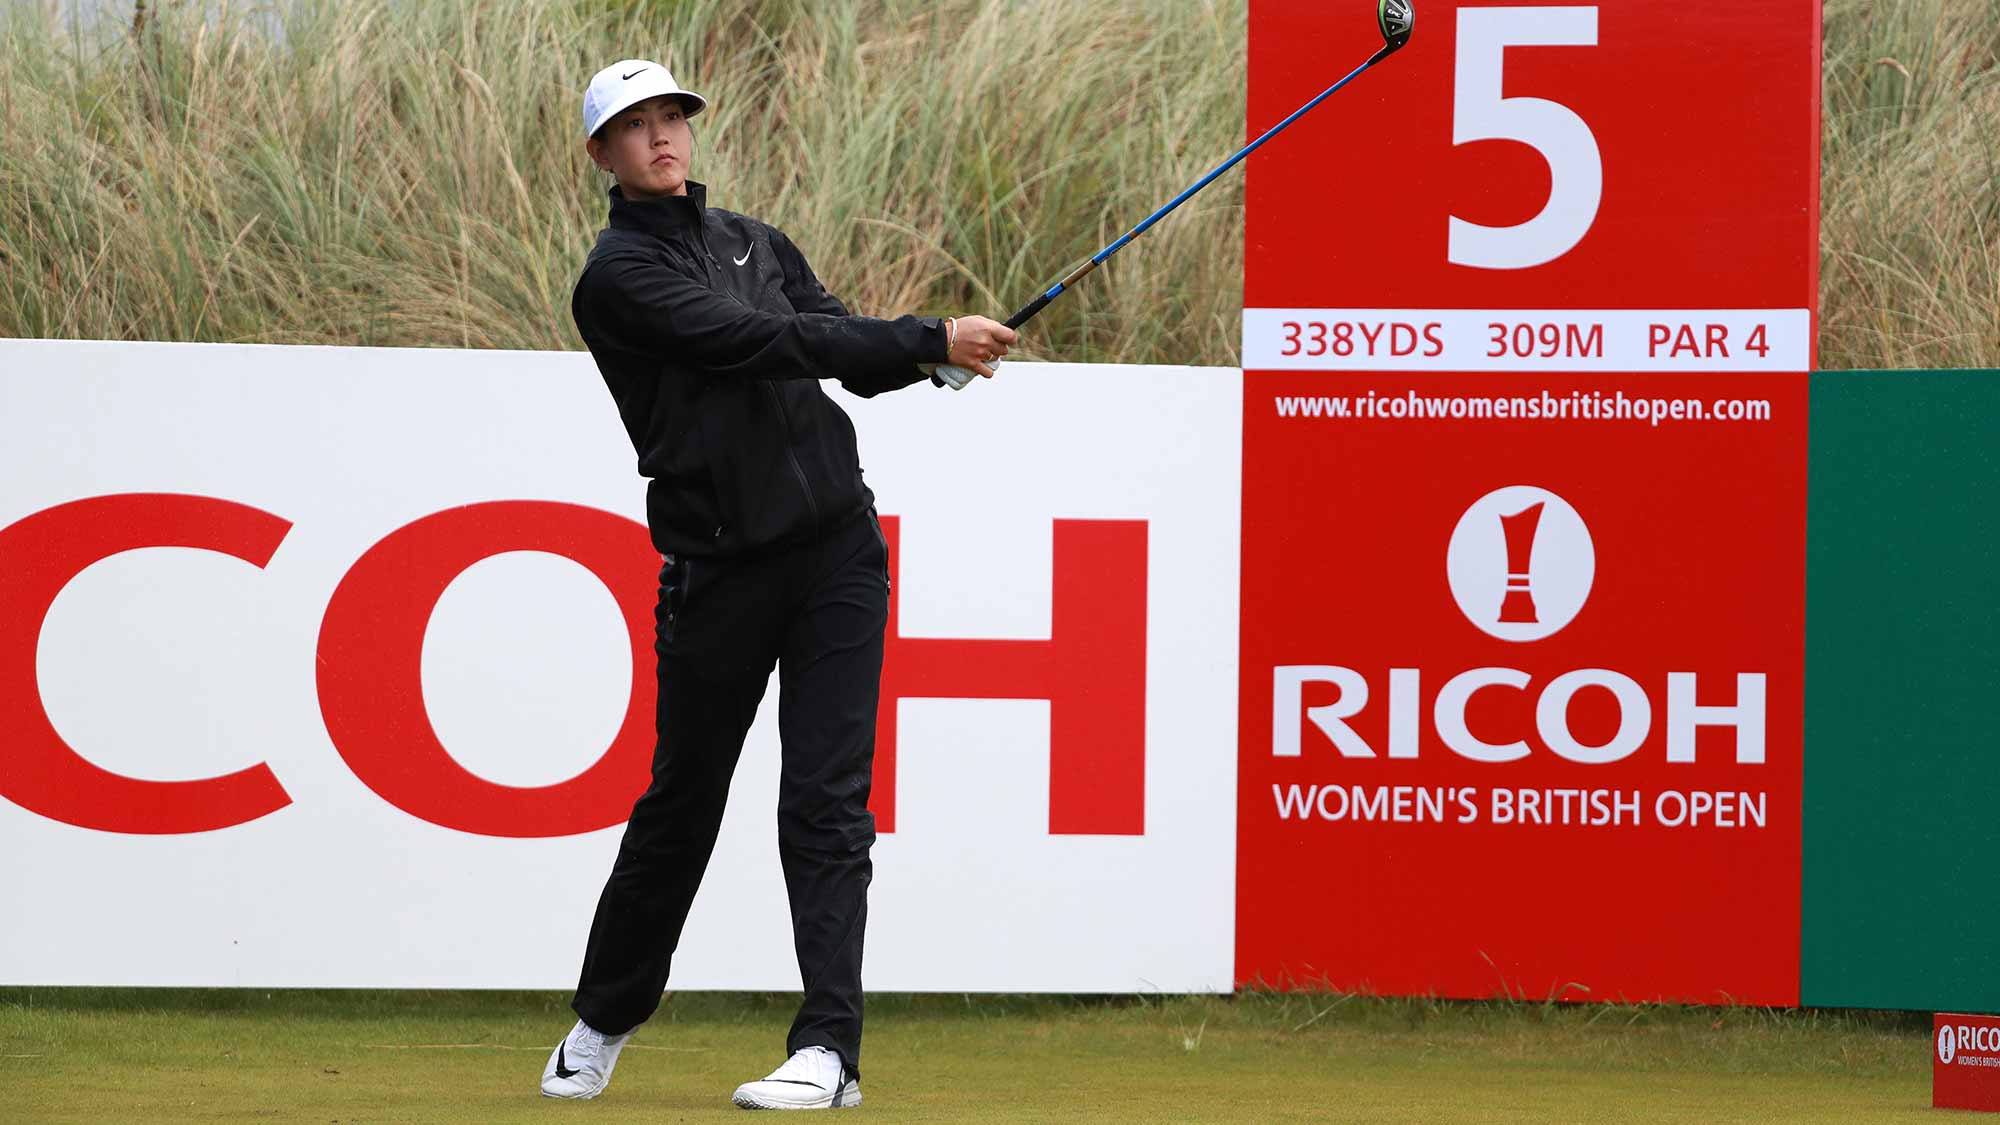 Michelle Wie of the United States tees off on the 5th hole during a pro-am round prior to the Ricoh Women's British Open at Kingsbarns Golf Links